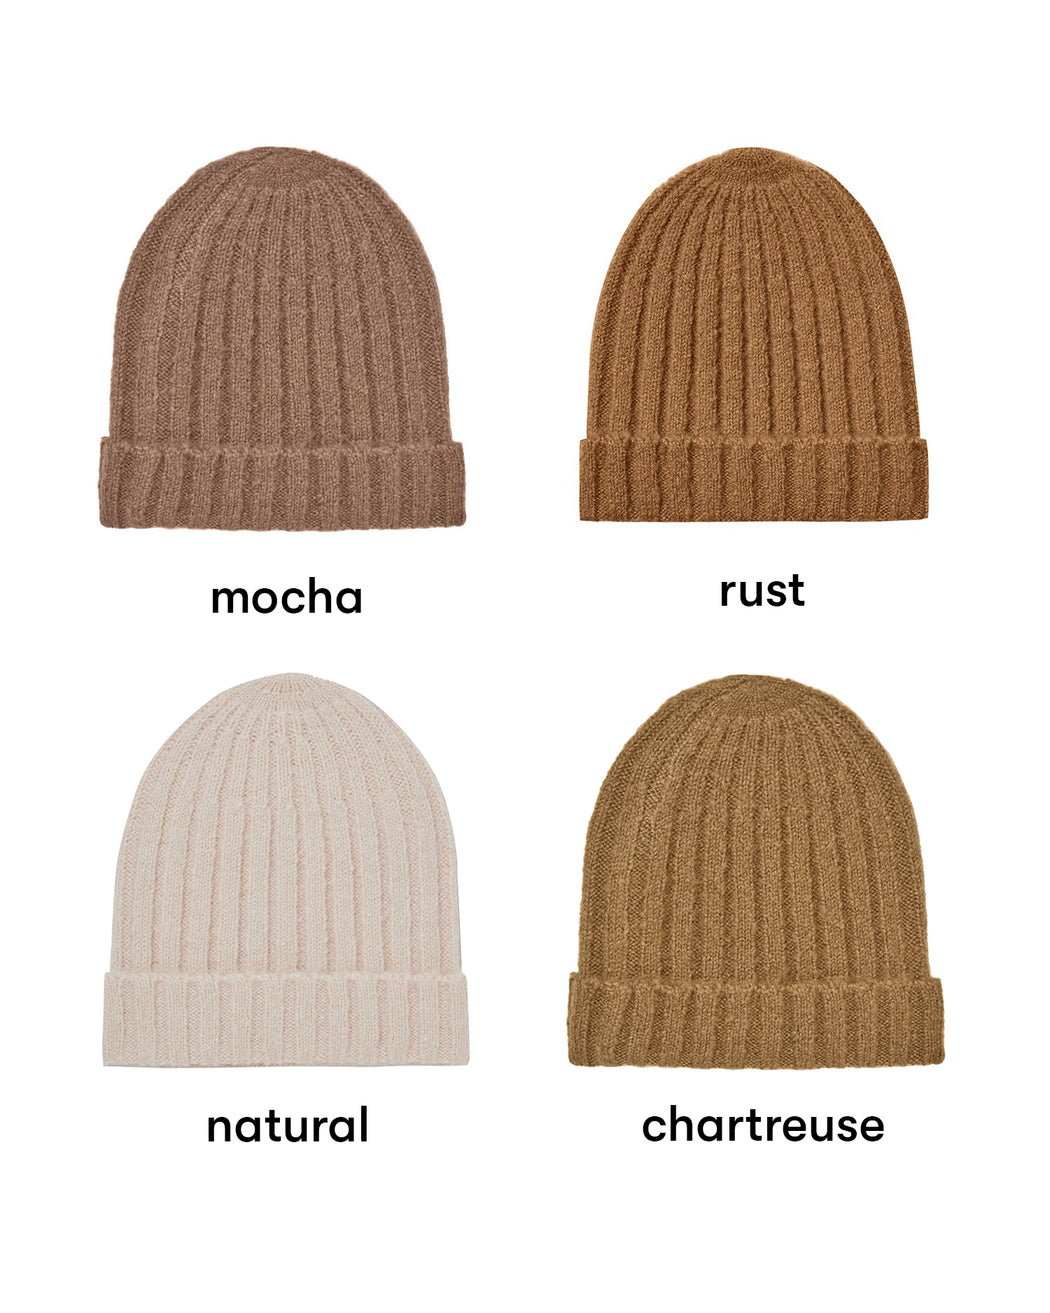 Kid's Beanie – Assorted Colors